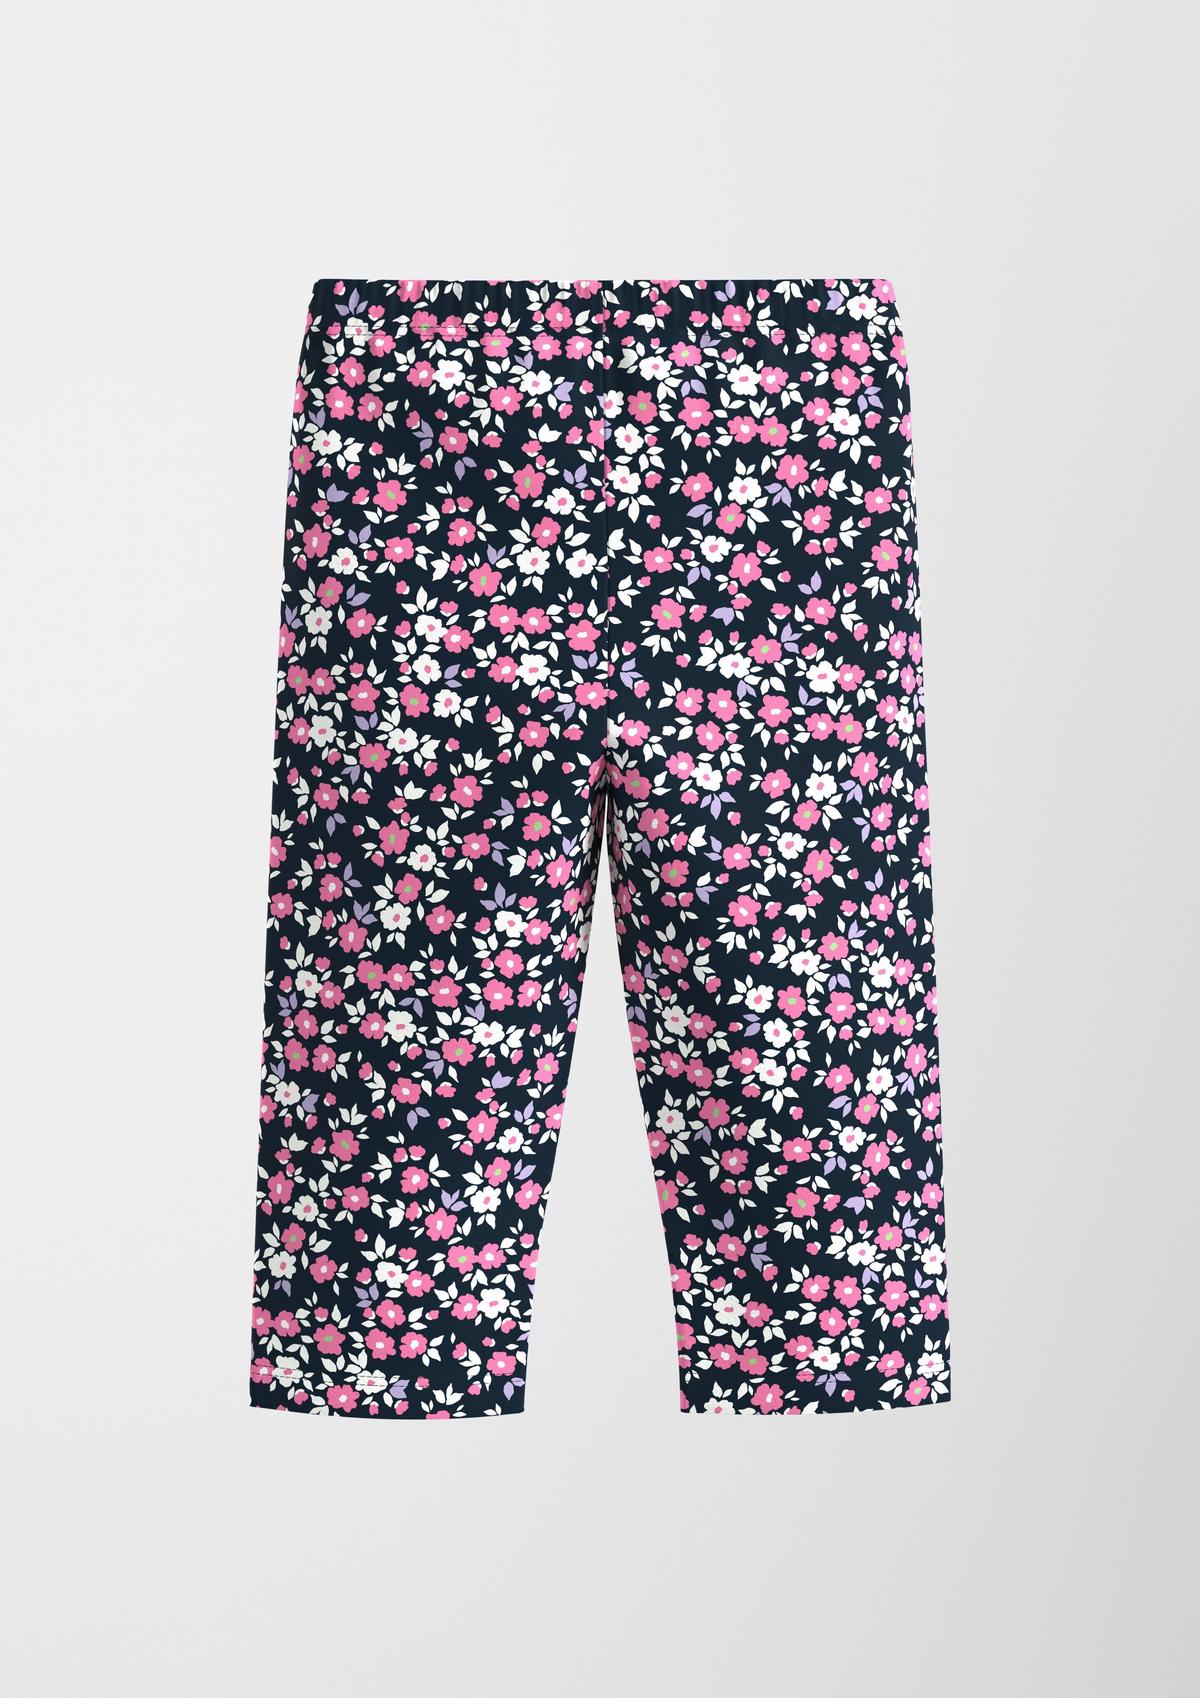 s.Oliver Capri leggings with an all-over print